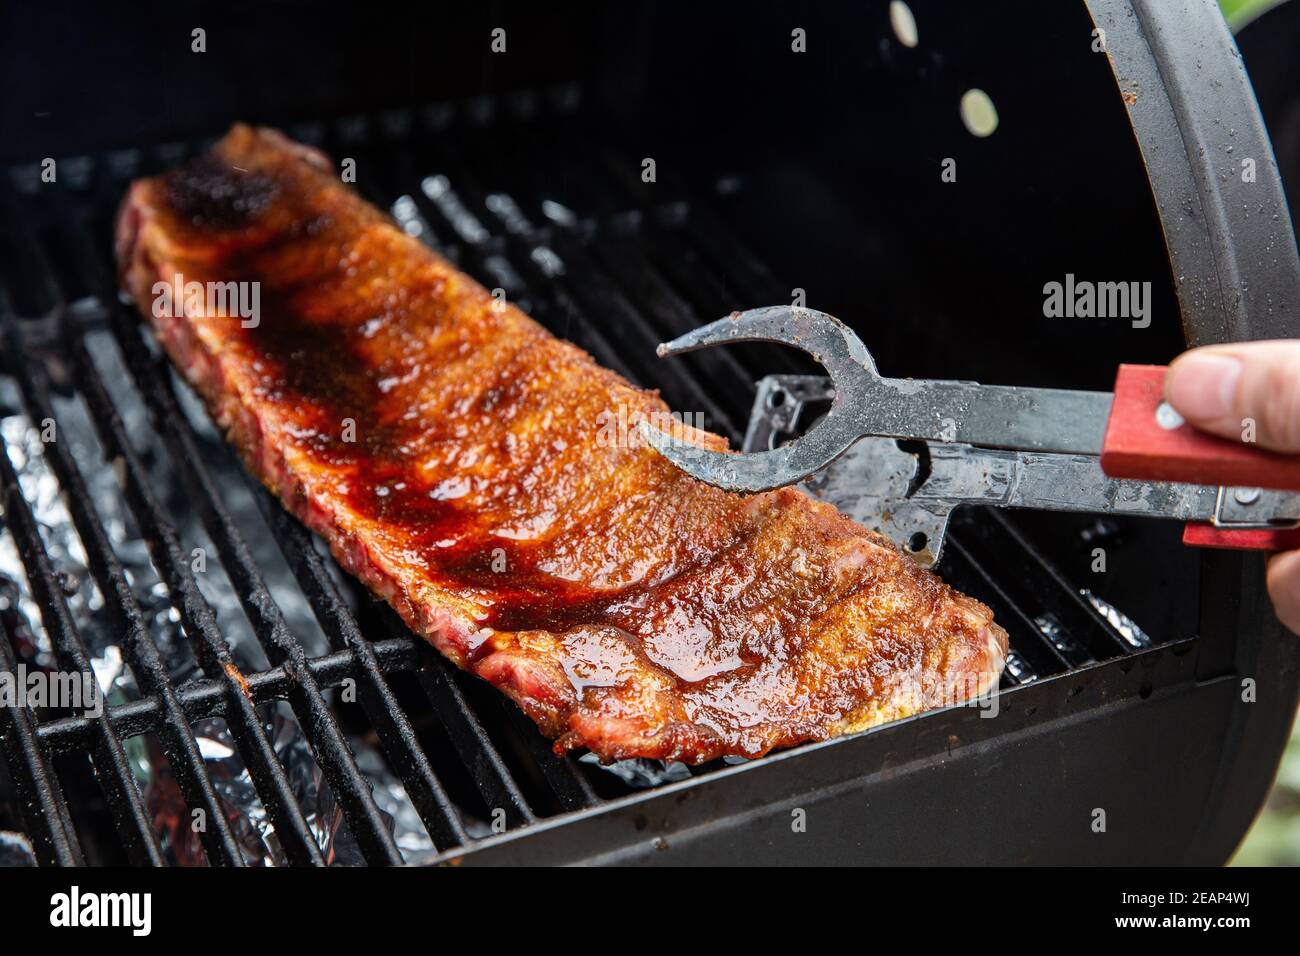 Close-up Of BBQ Roast and Smoked Pork Spareribs glazed with sauze On The Hot Charcoal Grill With Flames, Barbecue and hobby concept Stock Photo